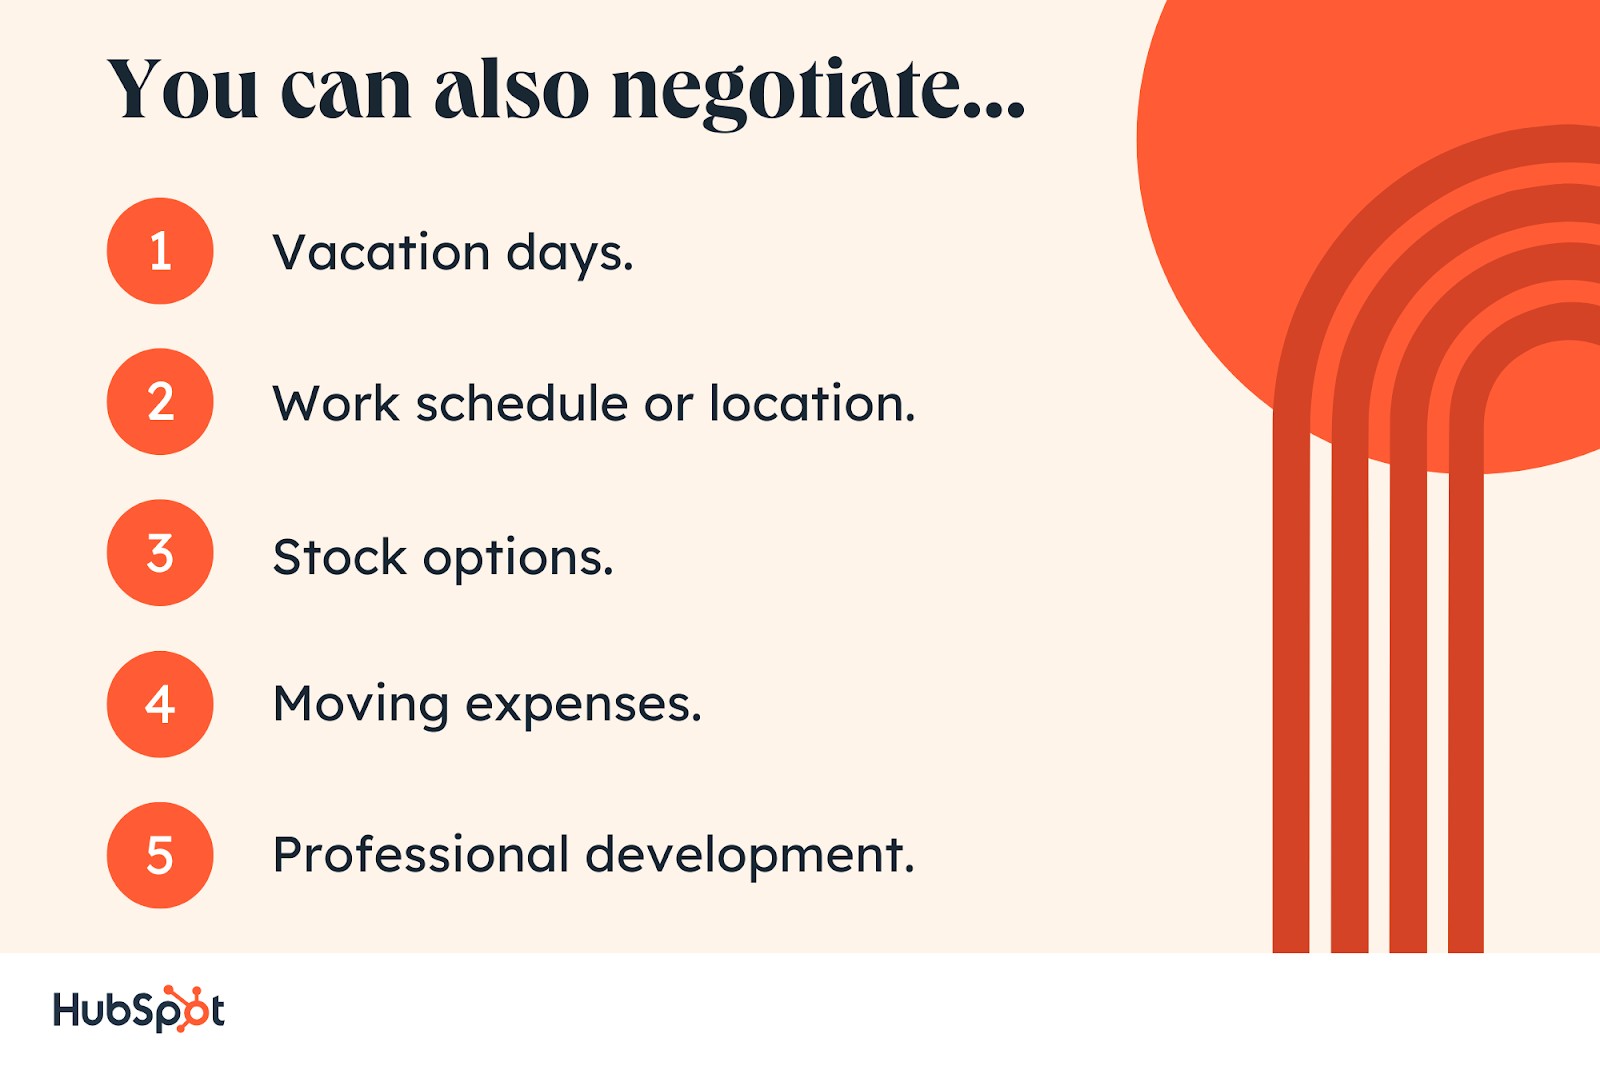 You can also negotiate… Vacation days. Work schedule or location. Stock options. Moving expenses. Professional development.